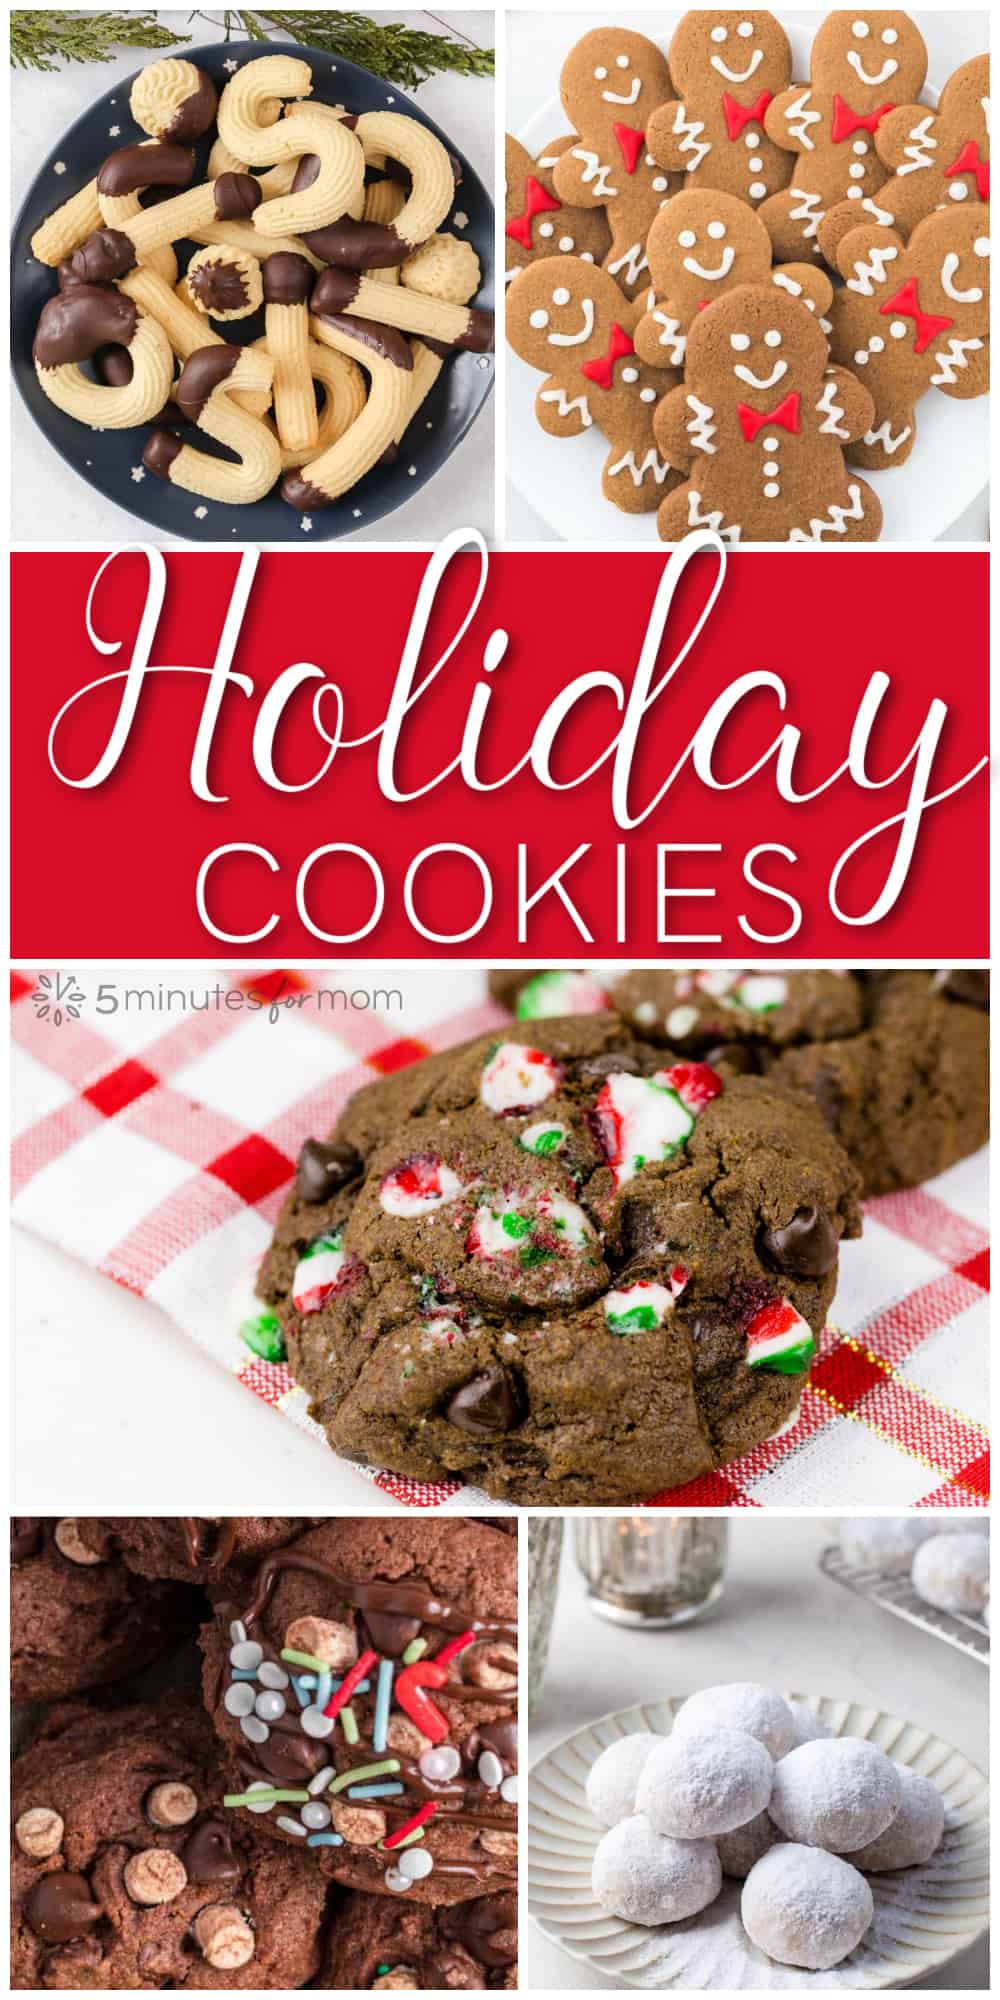 Holiday Cookie Recipes - Delicious Christmas Cookies